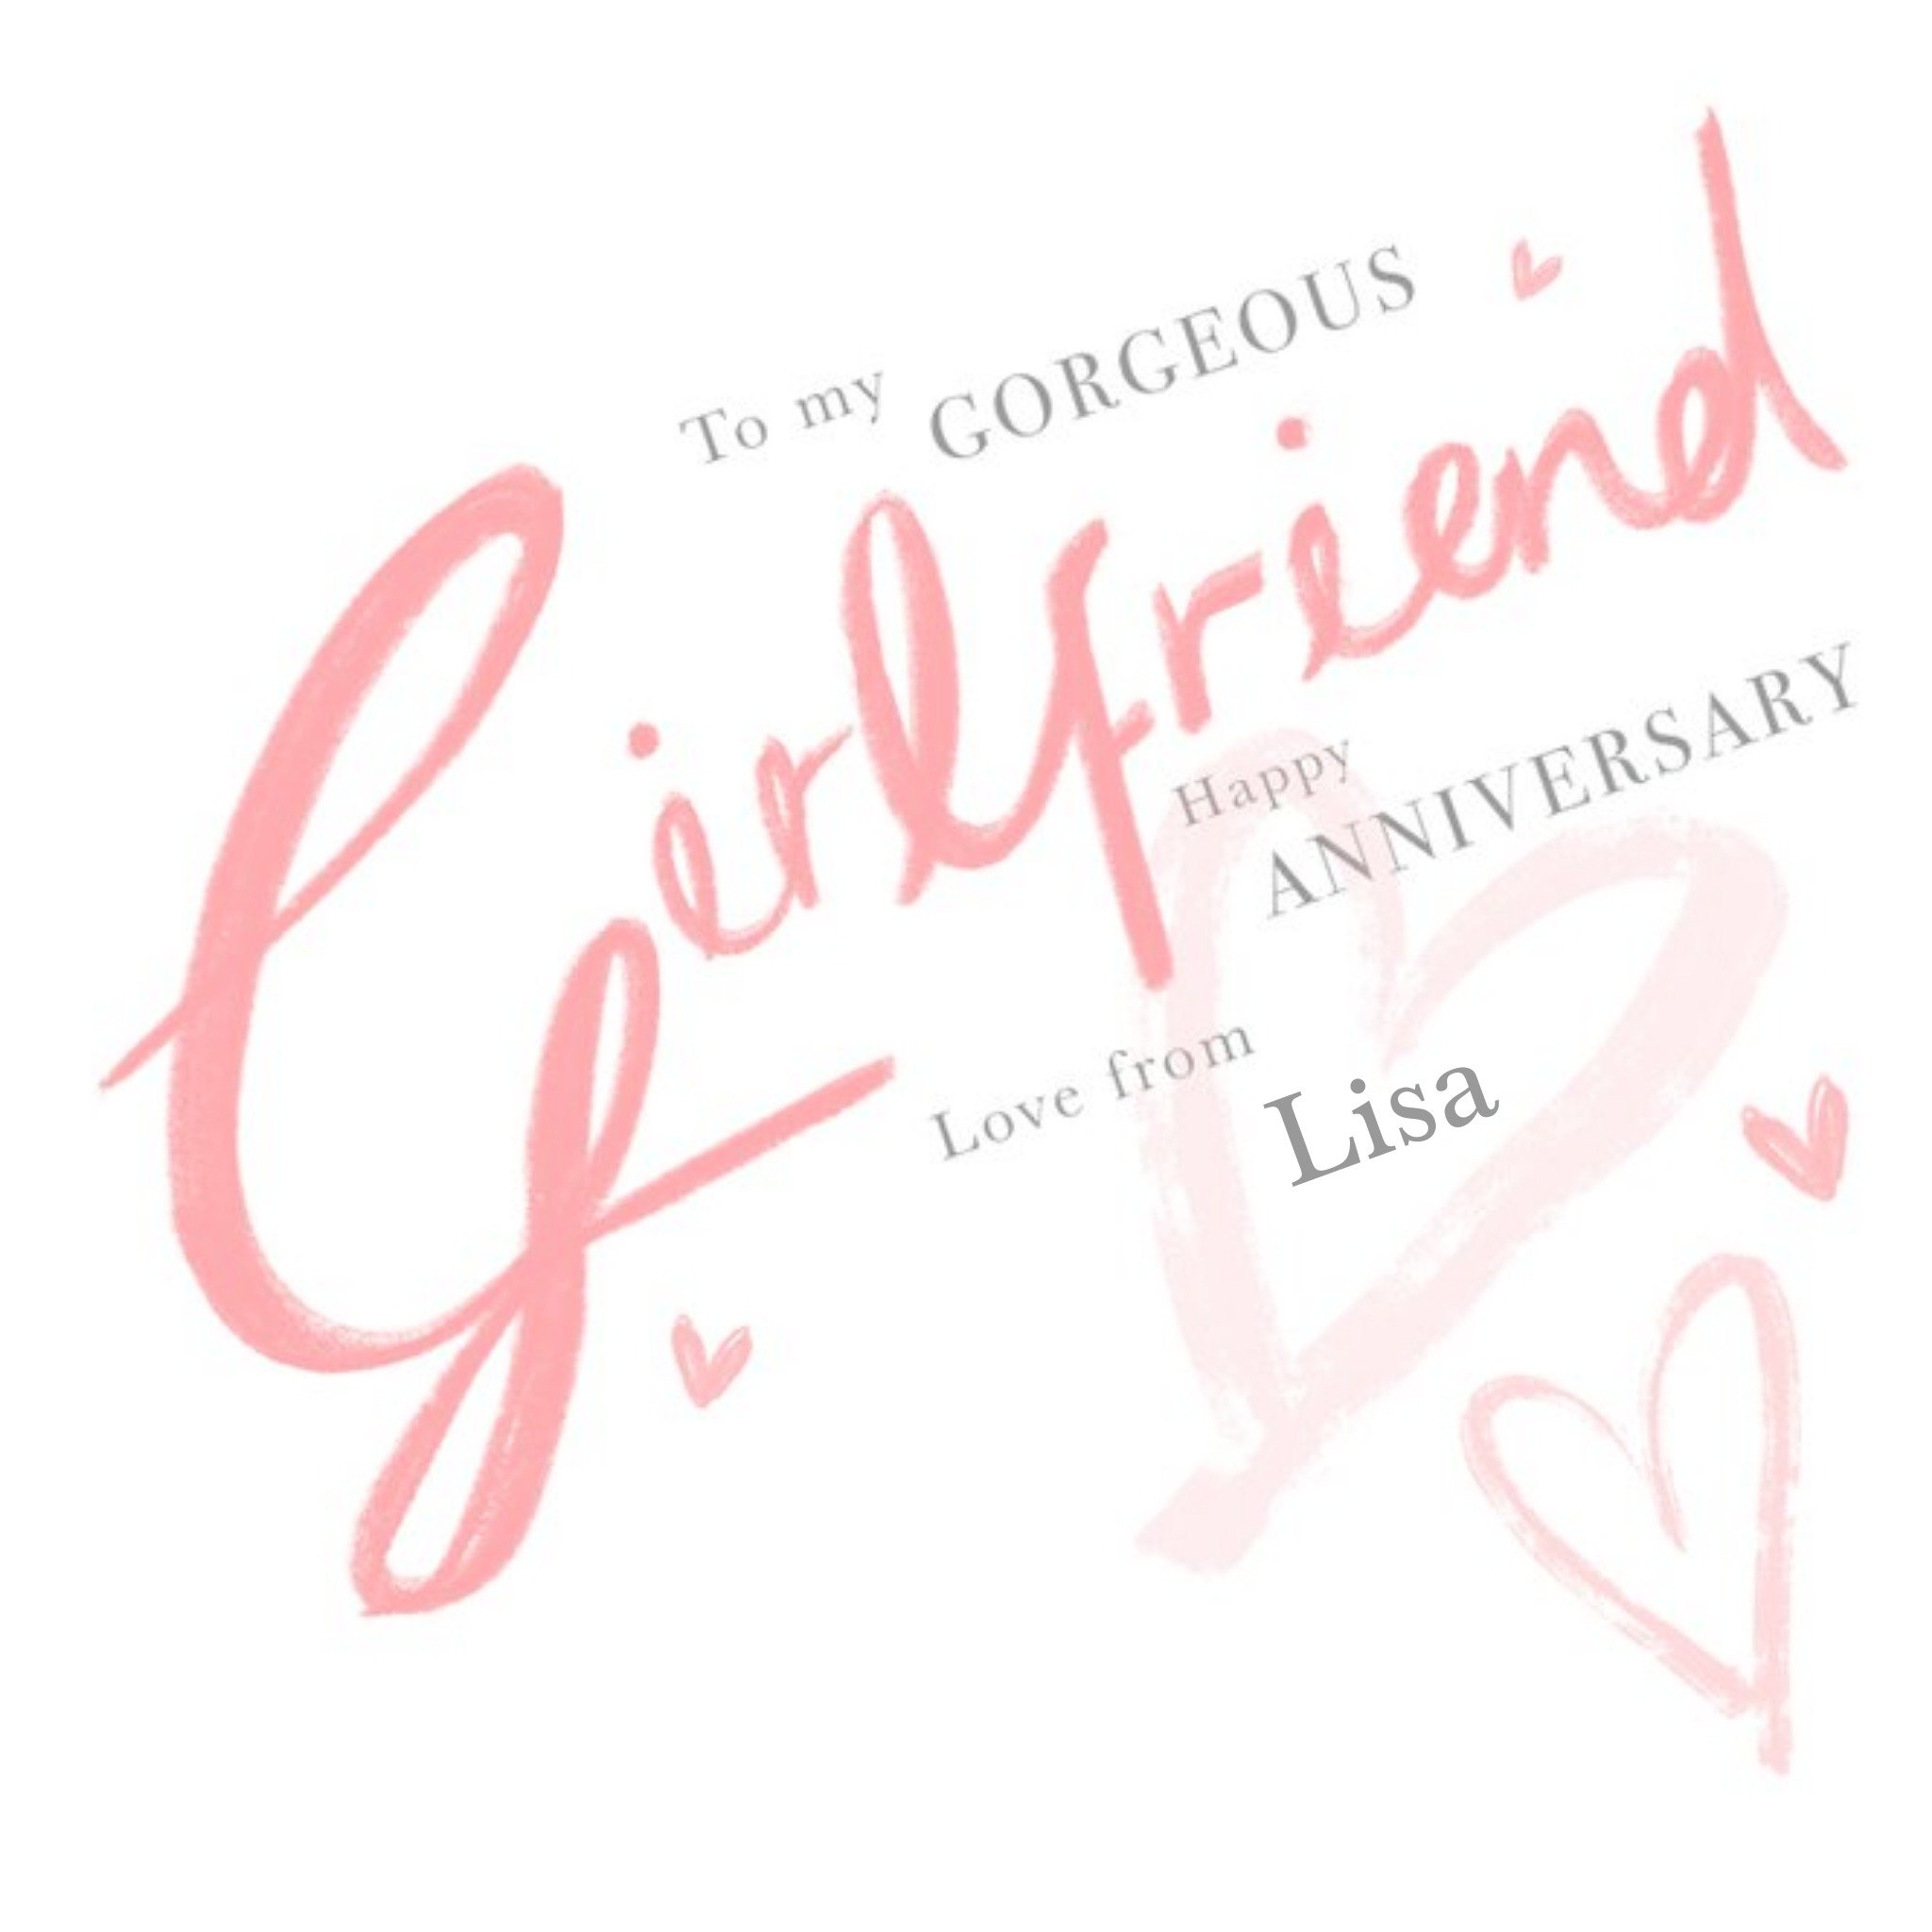 Love Hearts Millicent Venton Illustrated Pink Girlfriend Lettering Anniversary Card, Large